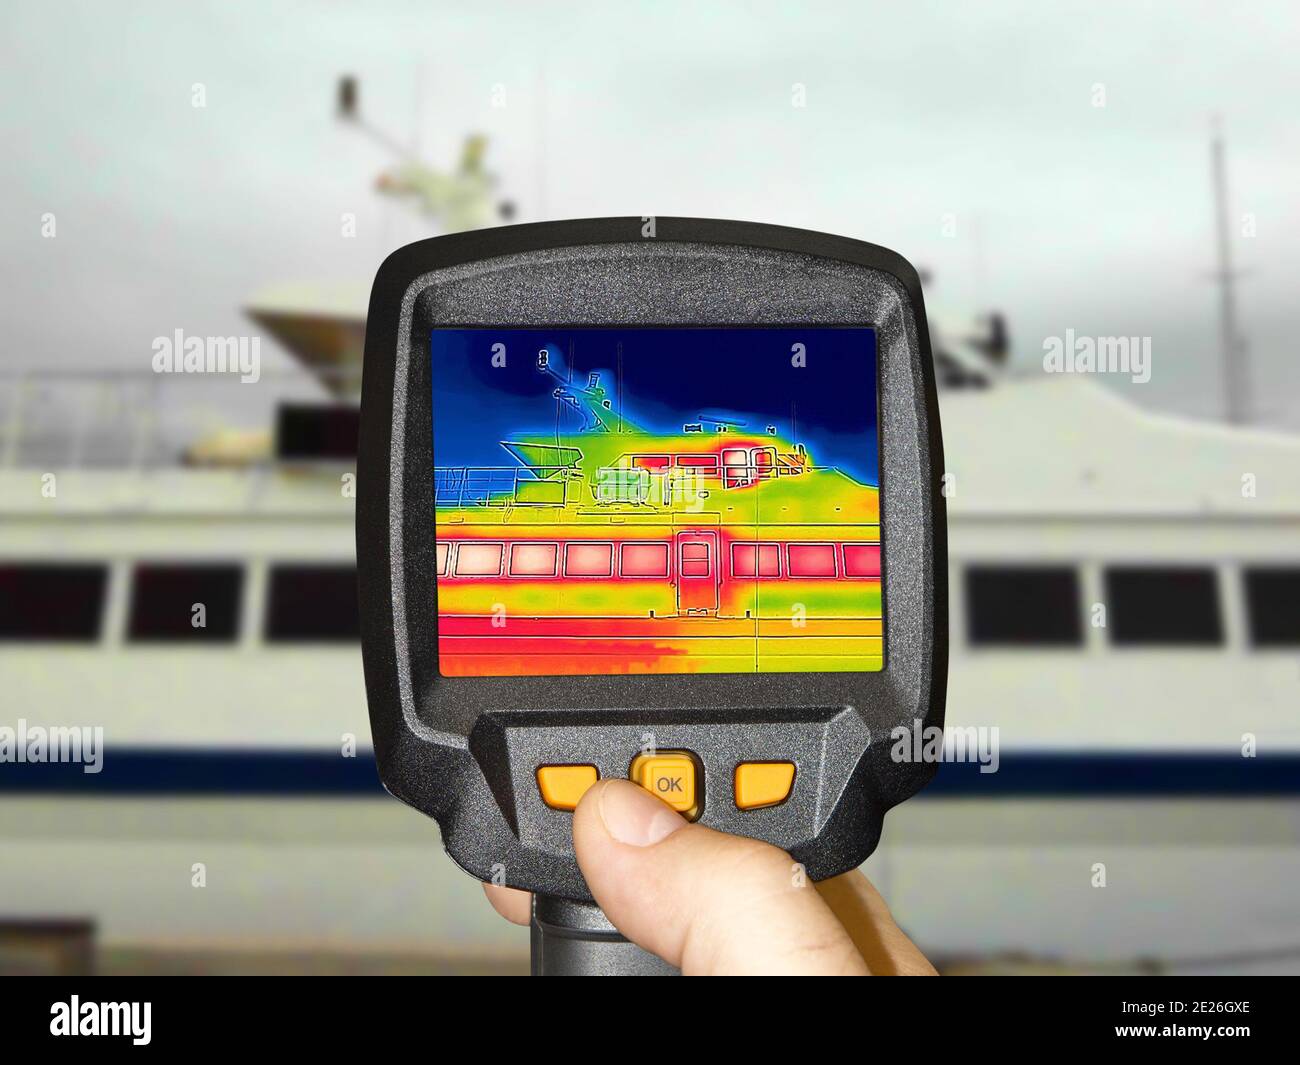 Recording Heat Loss Outside anchored luxury private motor yacht Using Infrared Thermal Camera Stock Photo